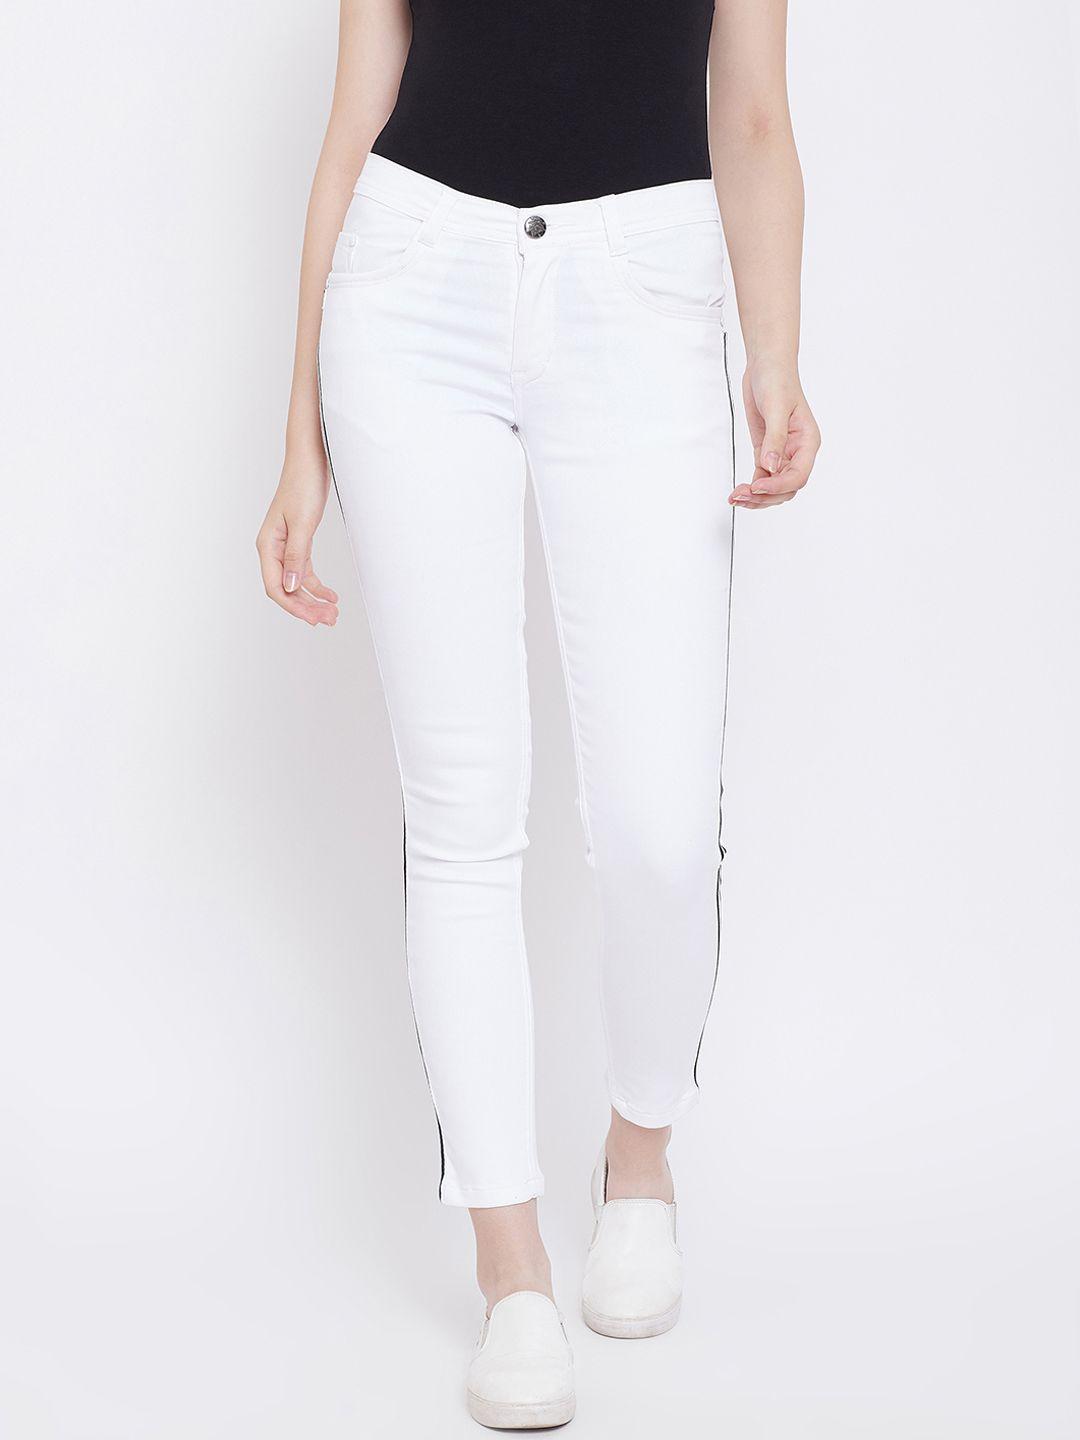 nifty women white slim fit mid-rise clean look stretchable jeans